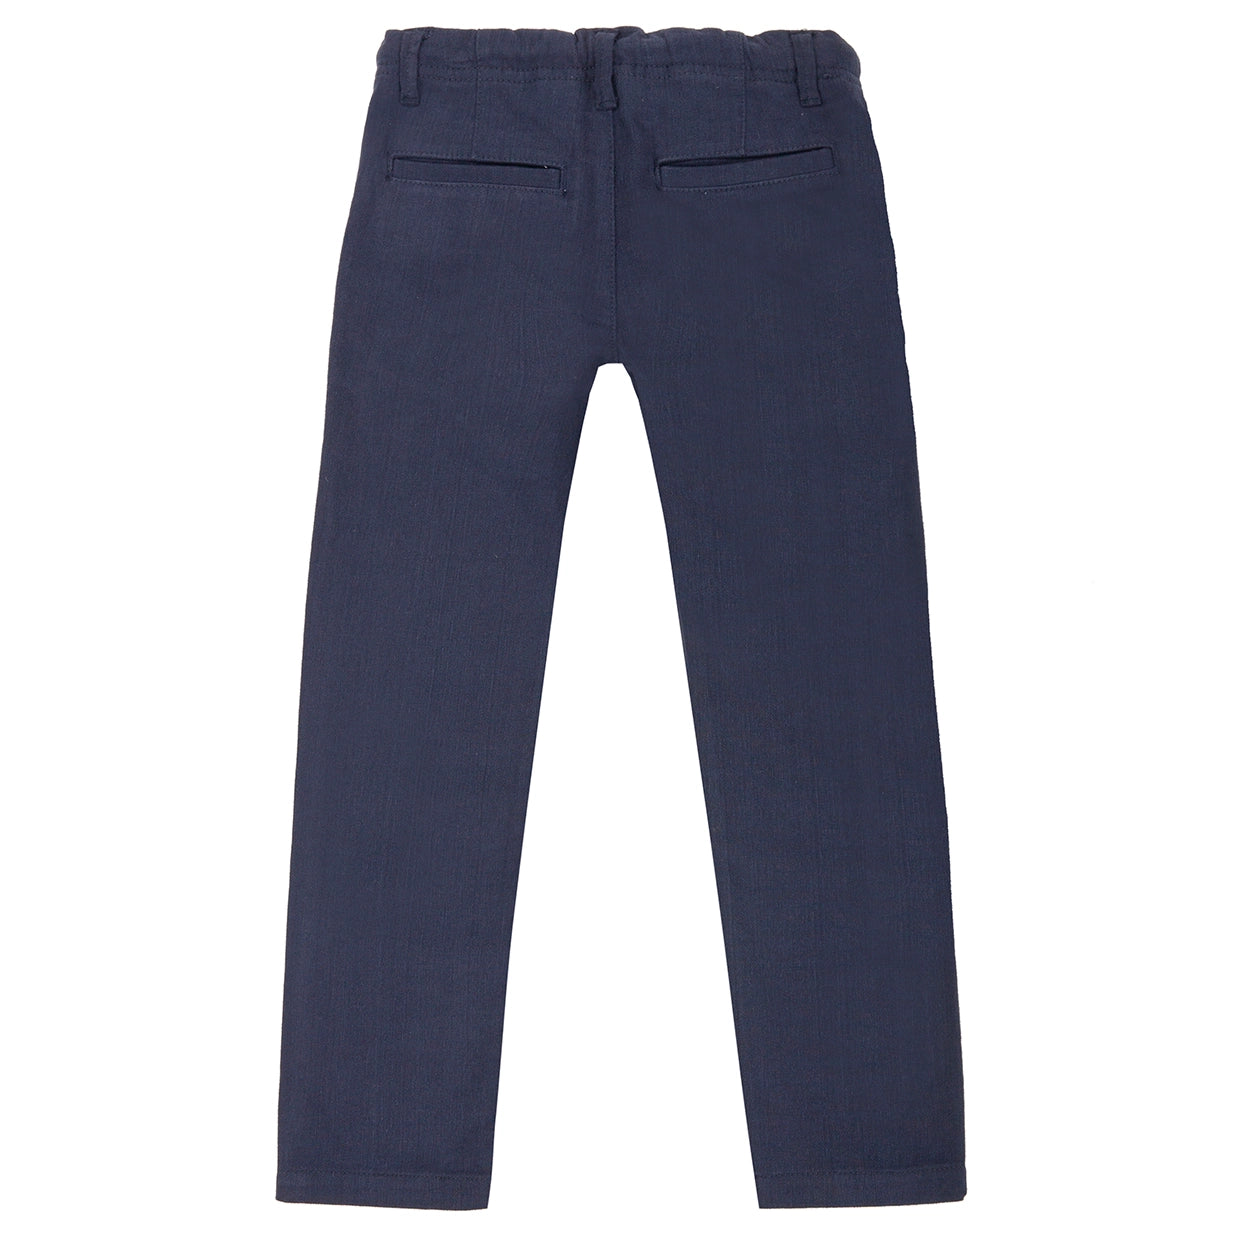 UBS2 Boy's stretch twill trousers in navy blue.